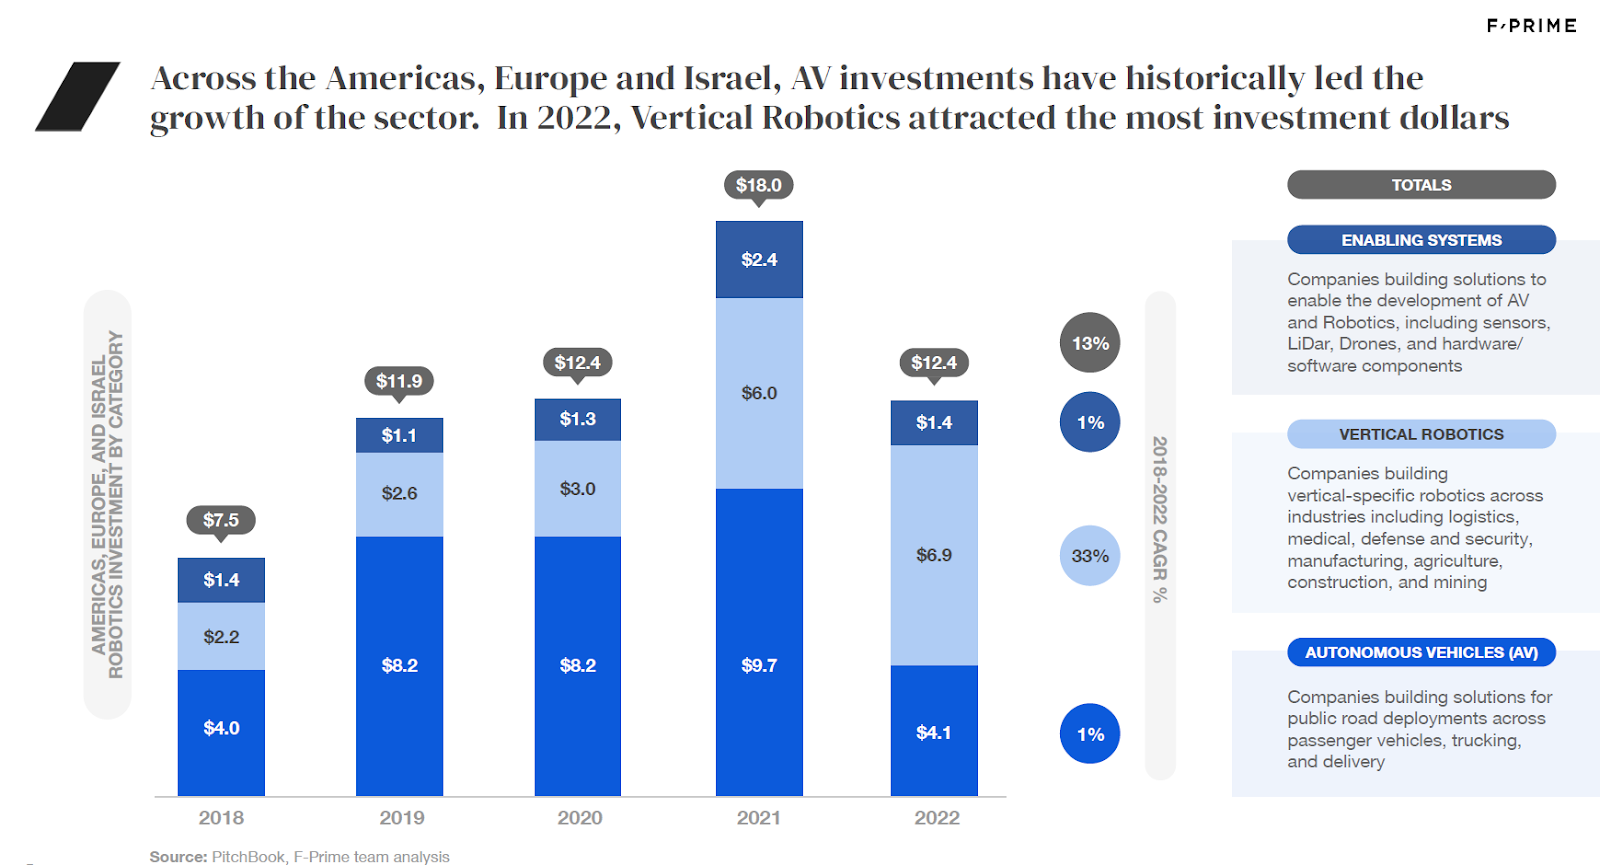 in 2022 ,vertical robotics attracted the most investment dollars.